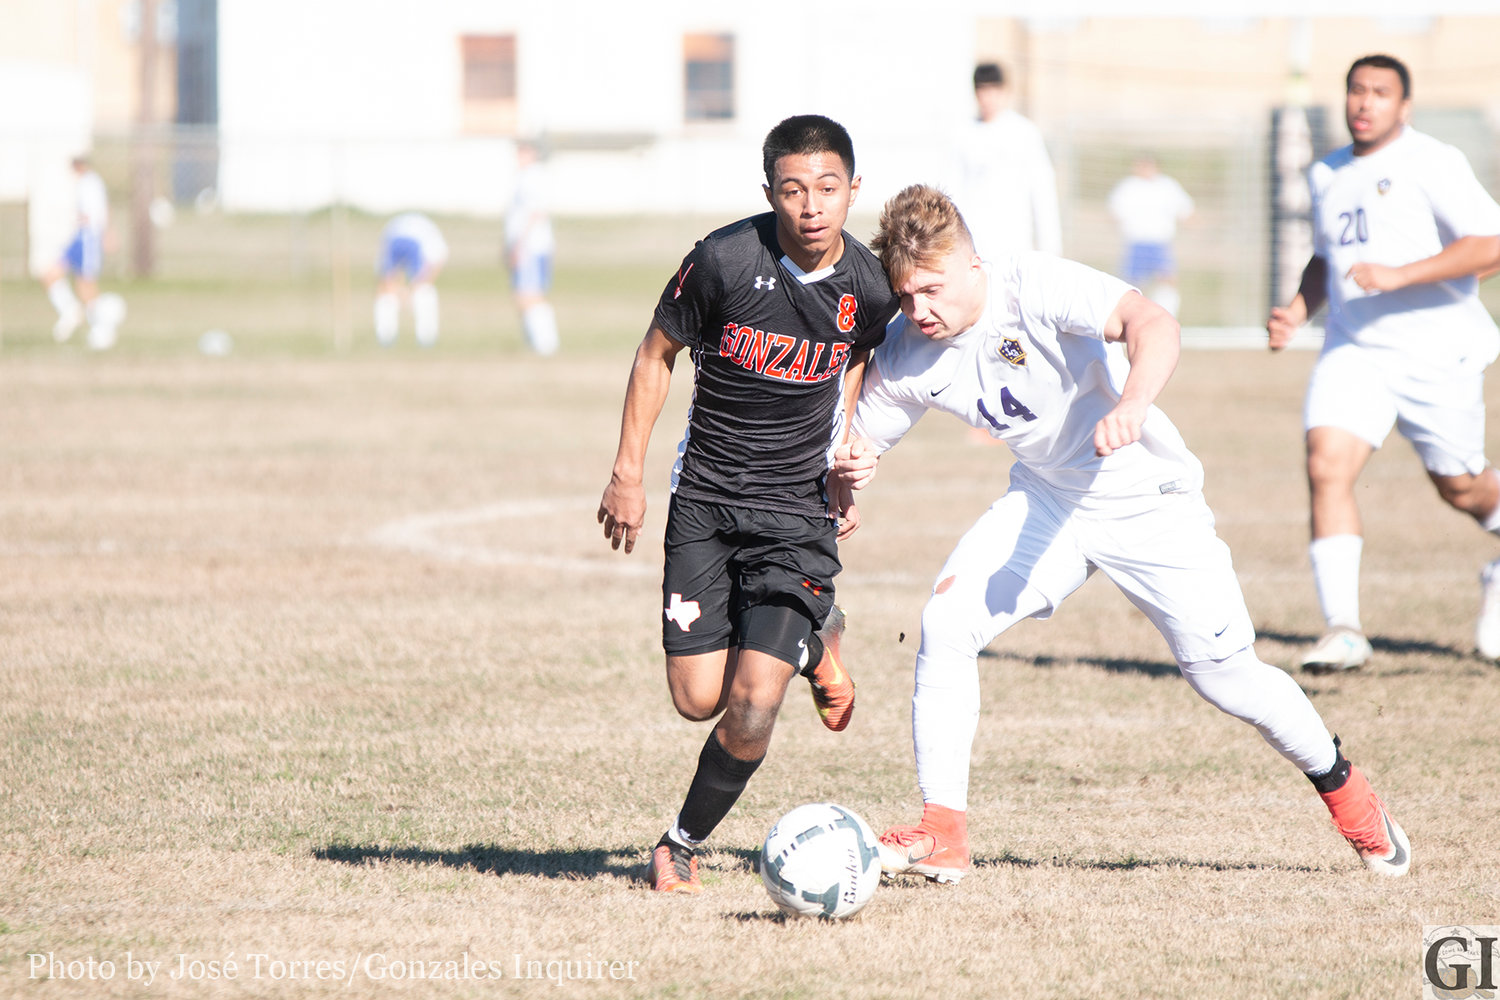 Antonio Hernandez (8) fights for the ball.